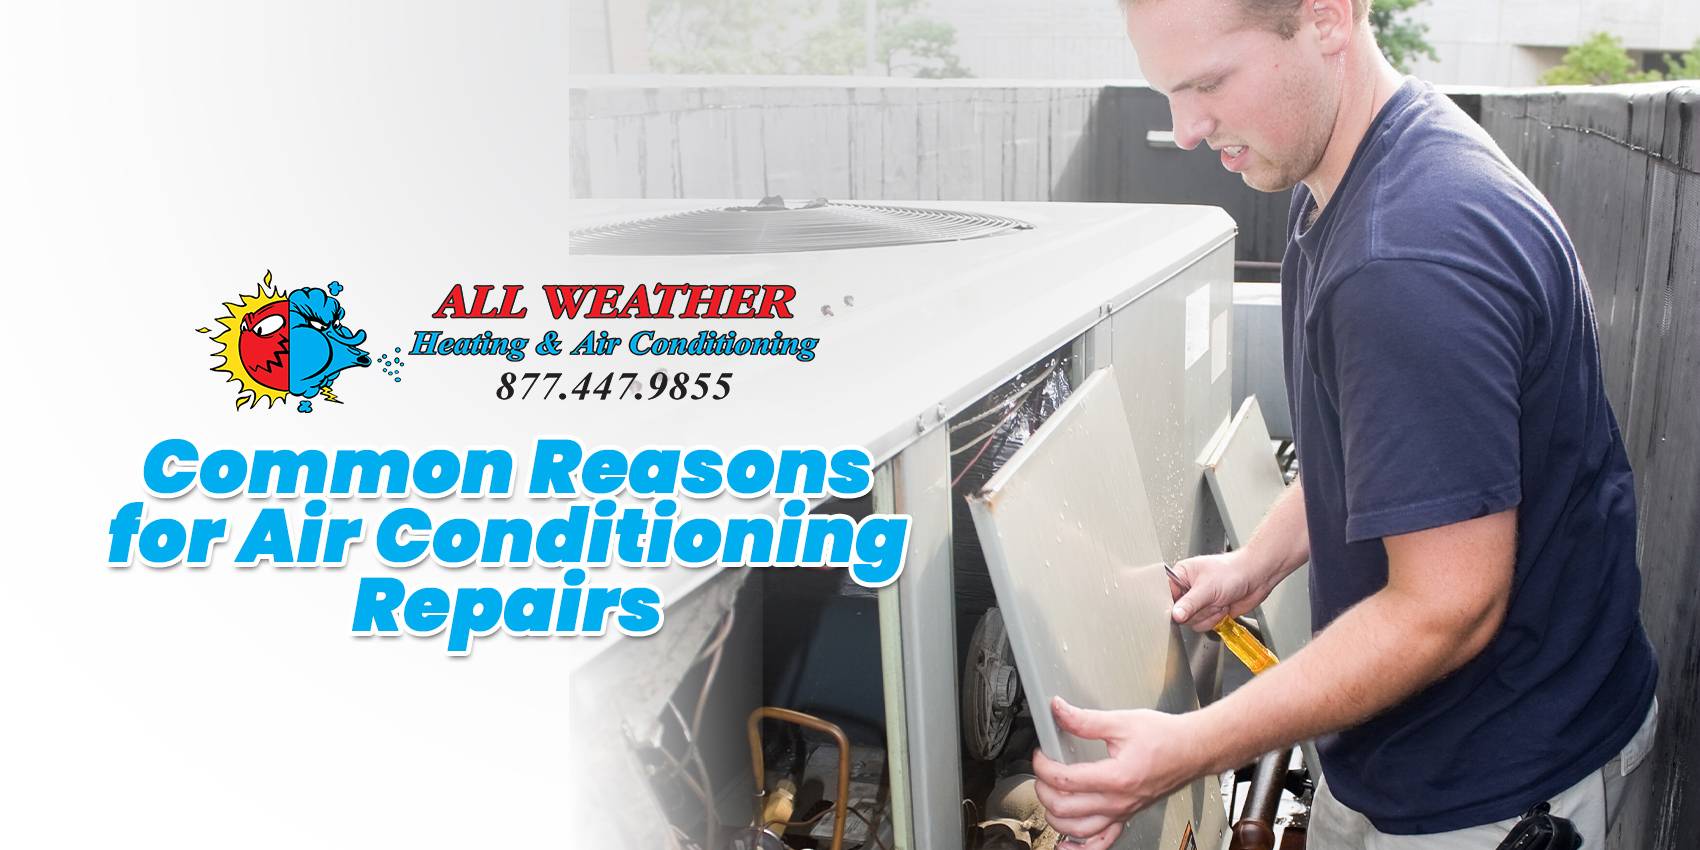 Common reasons for air conditioning repairs